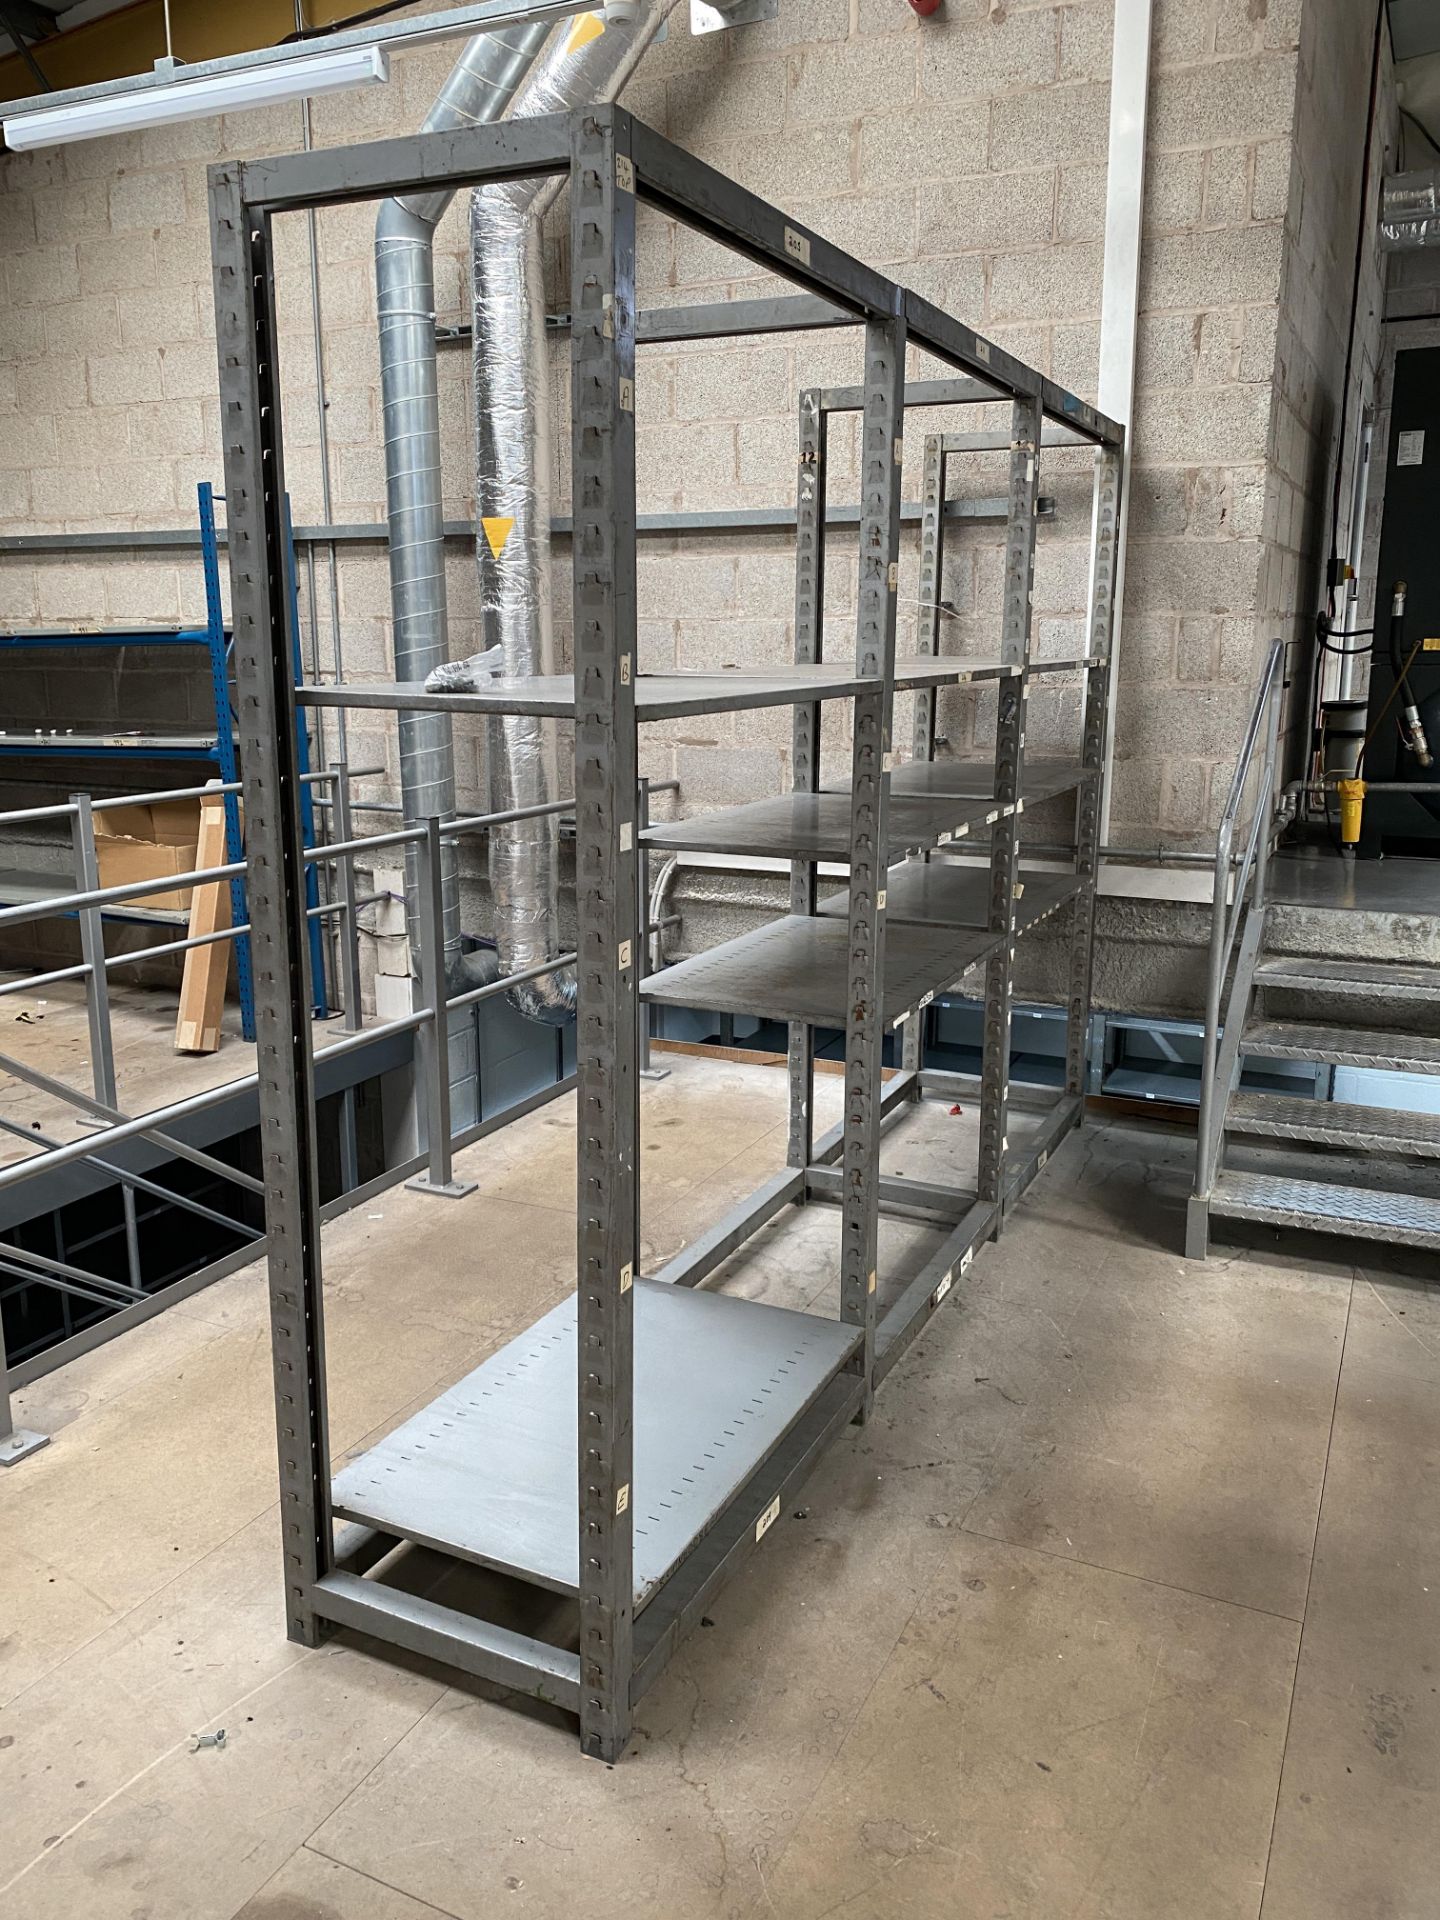 16 x Assorted Bays of Stock Racking with Metal Shelving and a Wall Mounted Storage Bin Holder. - Image 2 of 8